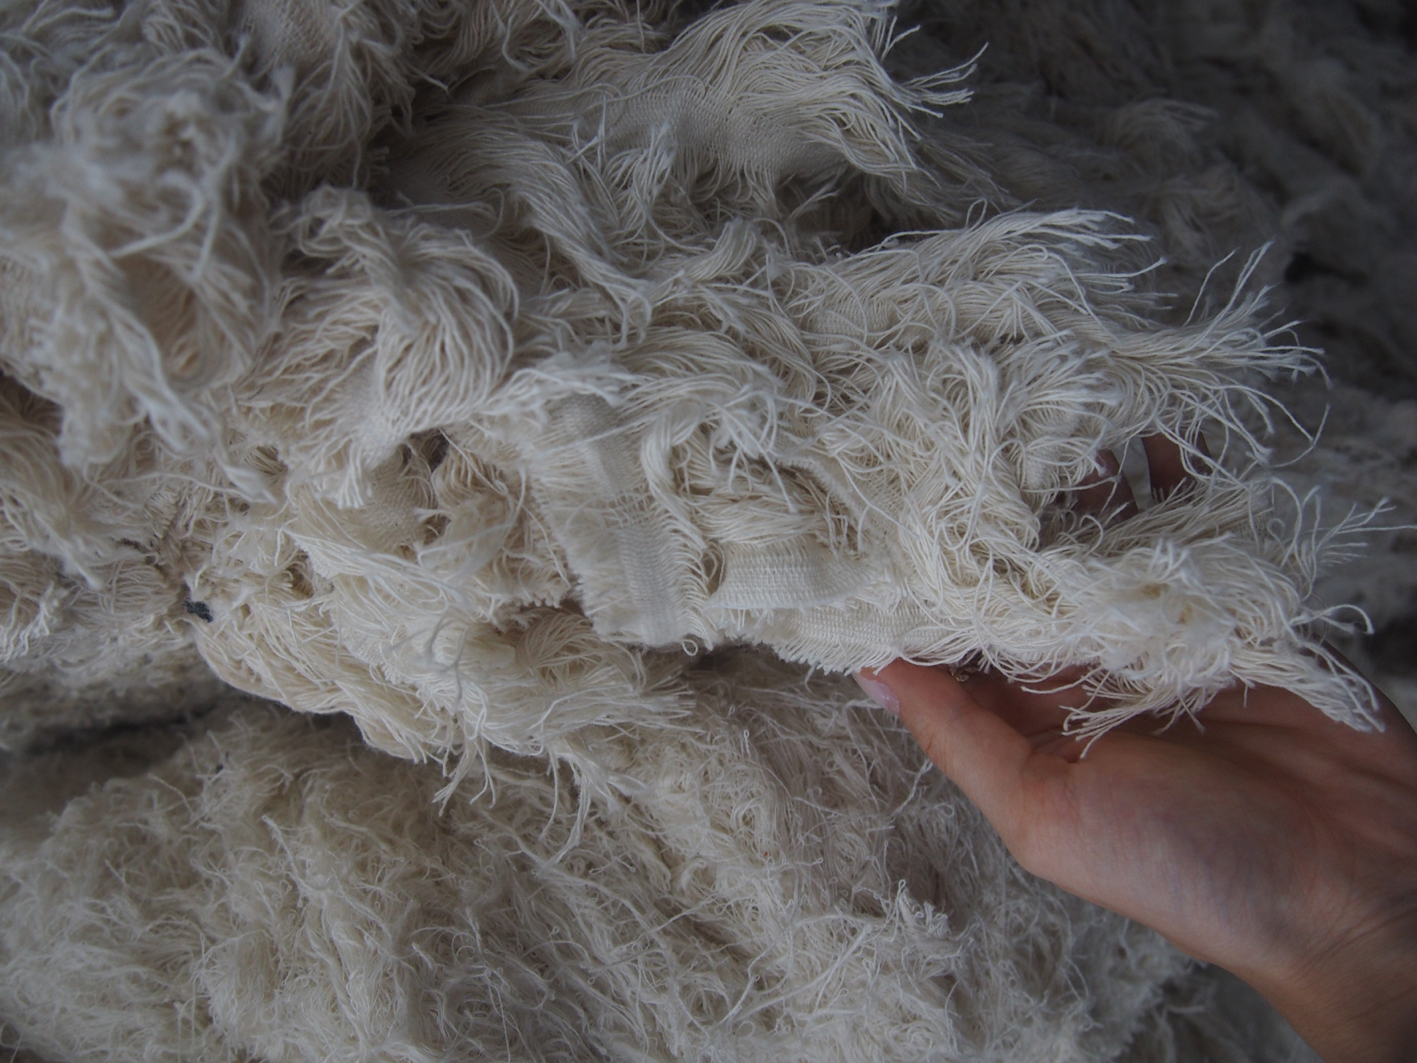 Recycled Cotton is Still an Emerging Fabric – Sustainable Fashion